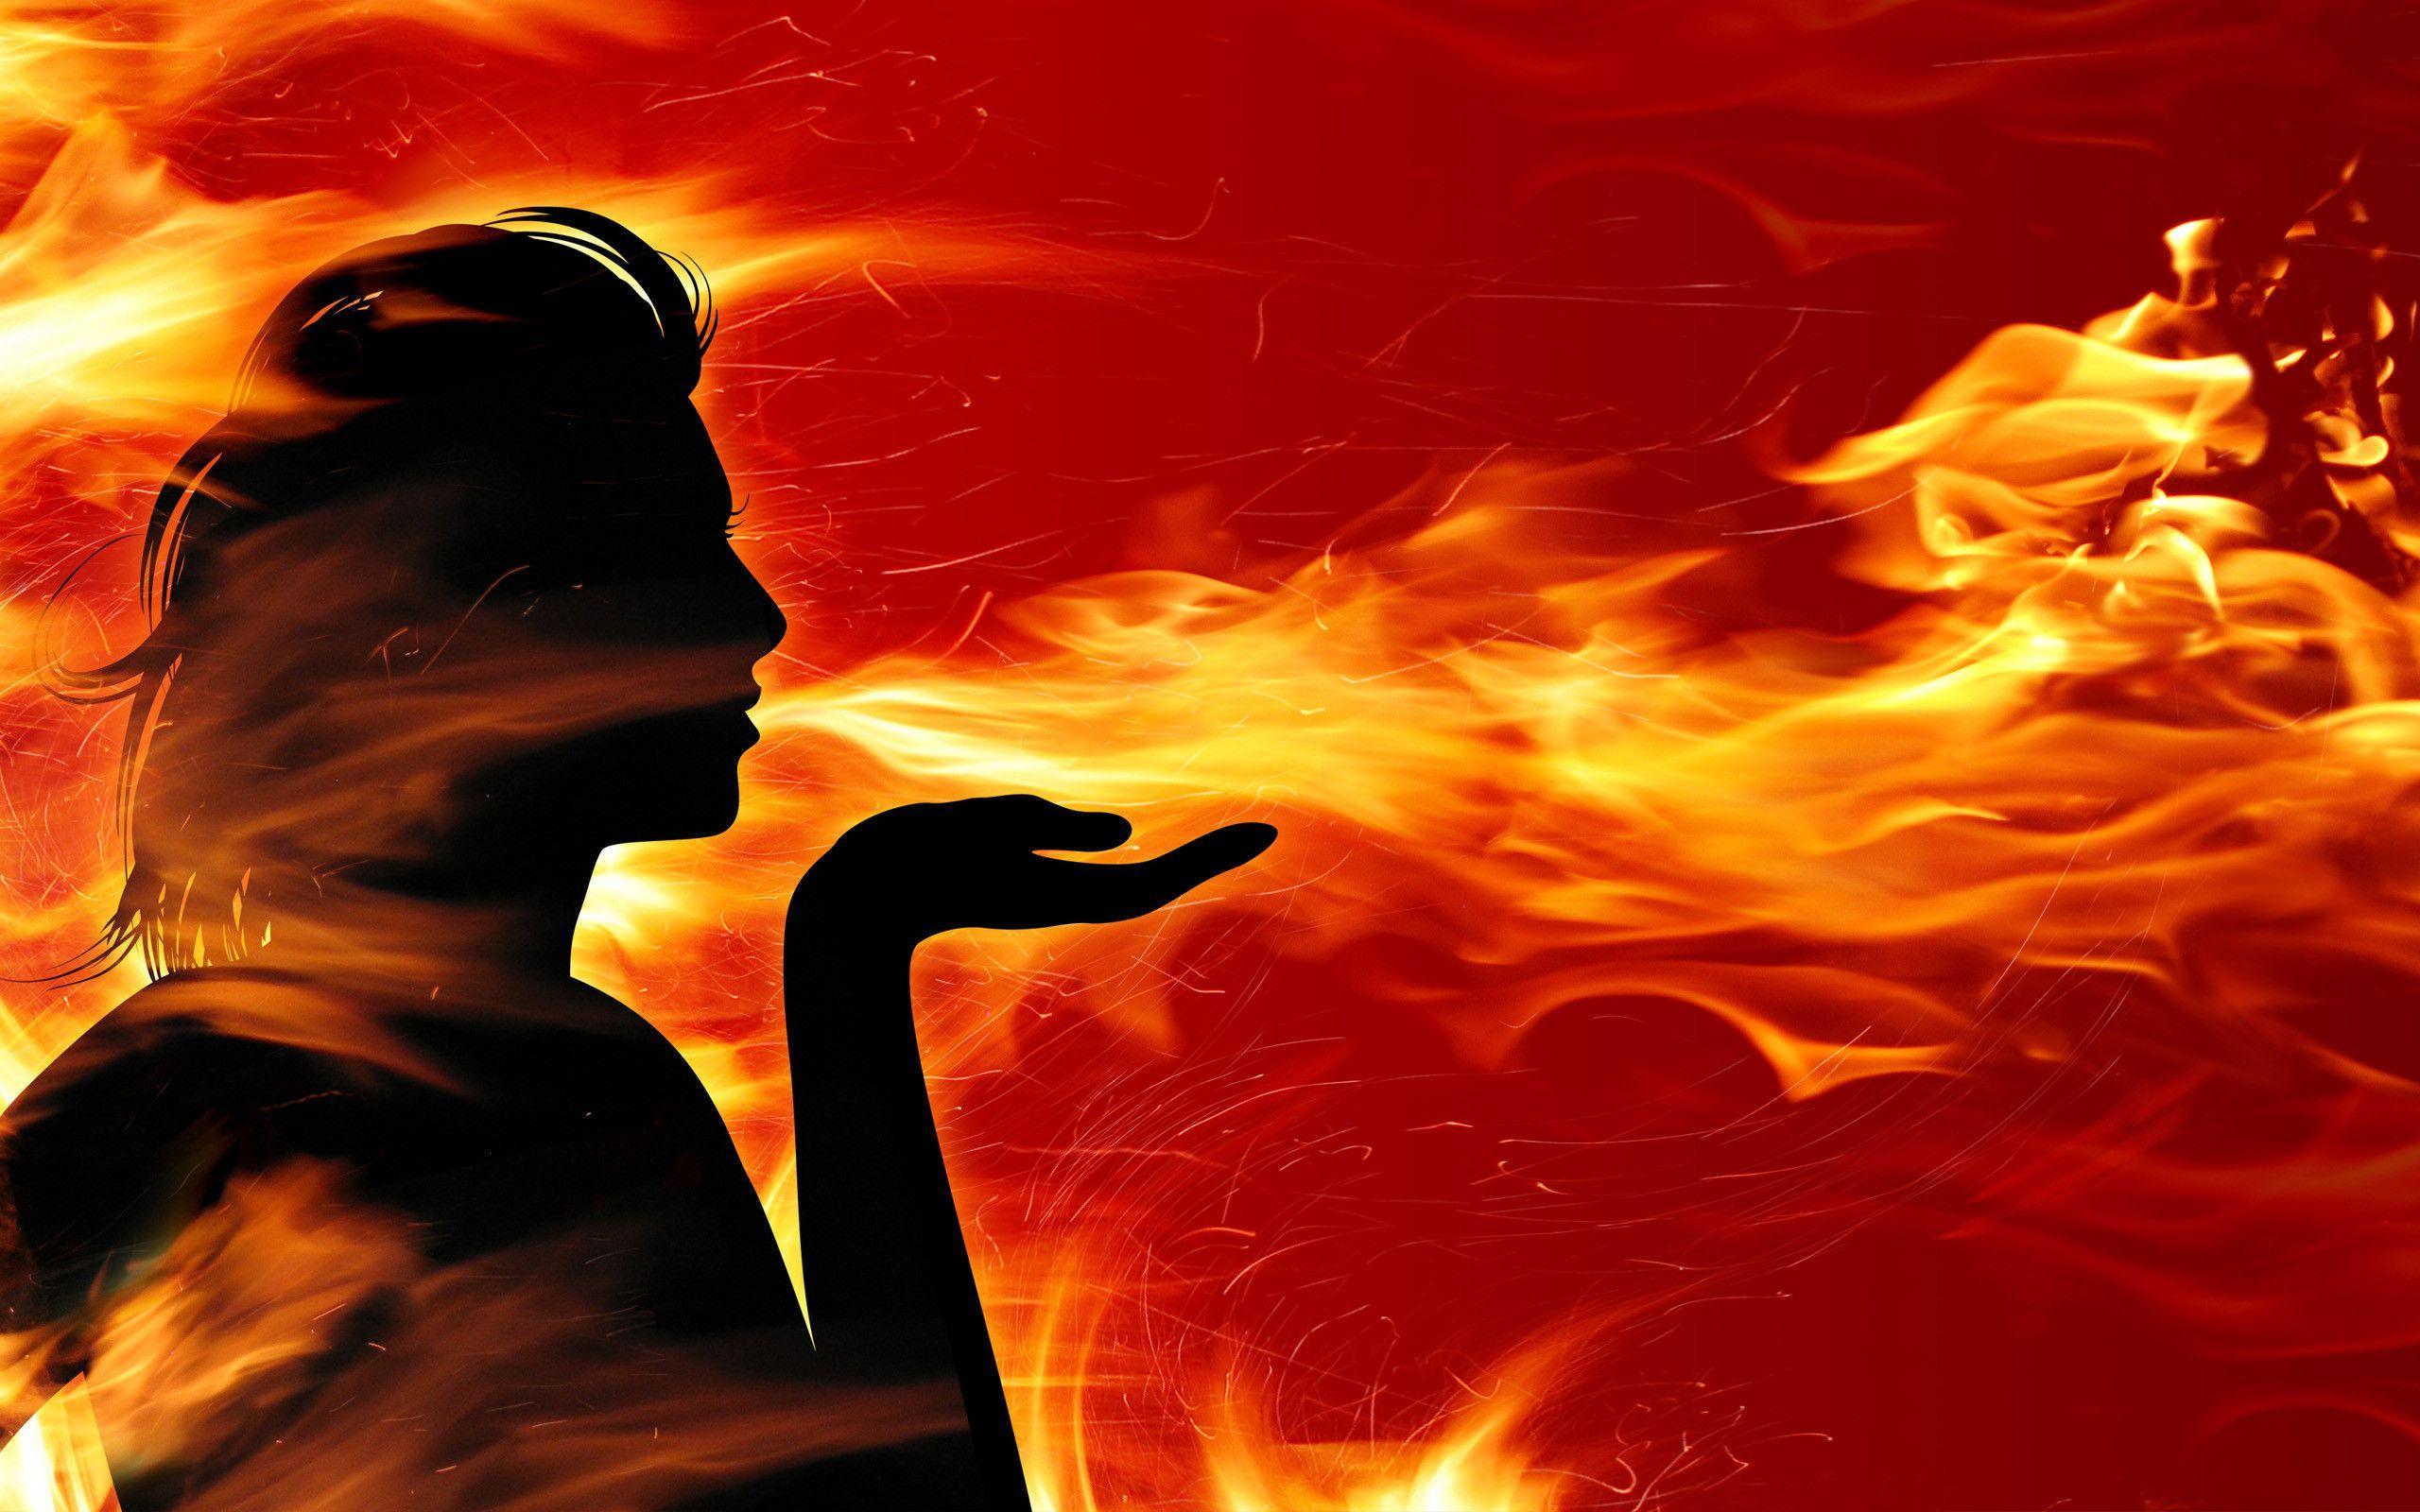 Excellent Fire Wallpaper 2560x1600PX Noteworthy Free Wallpaper